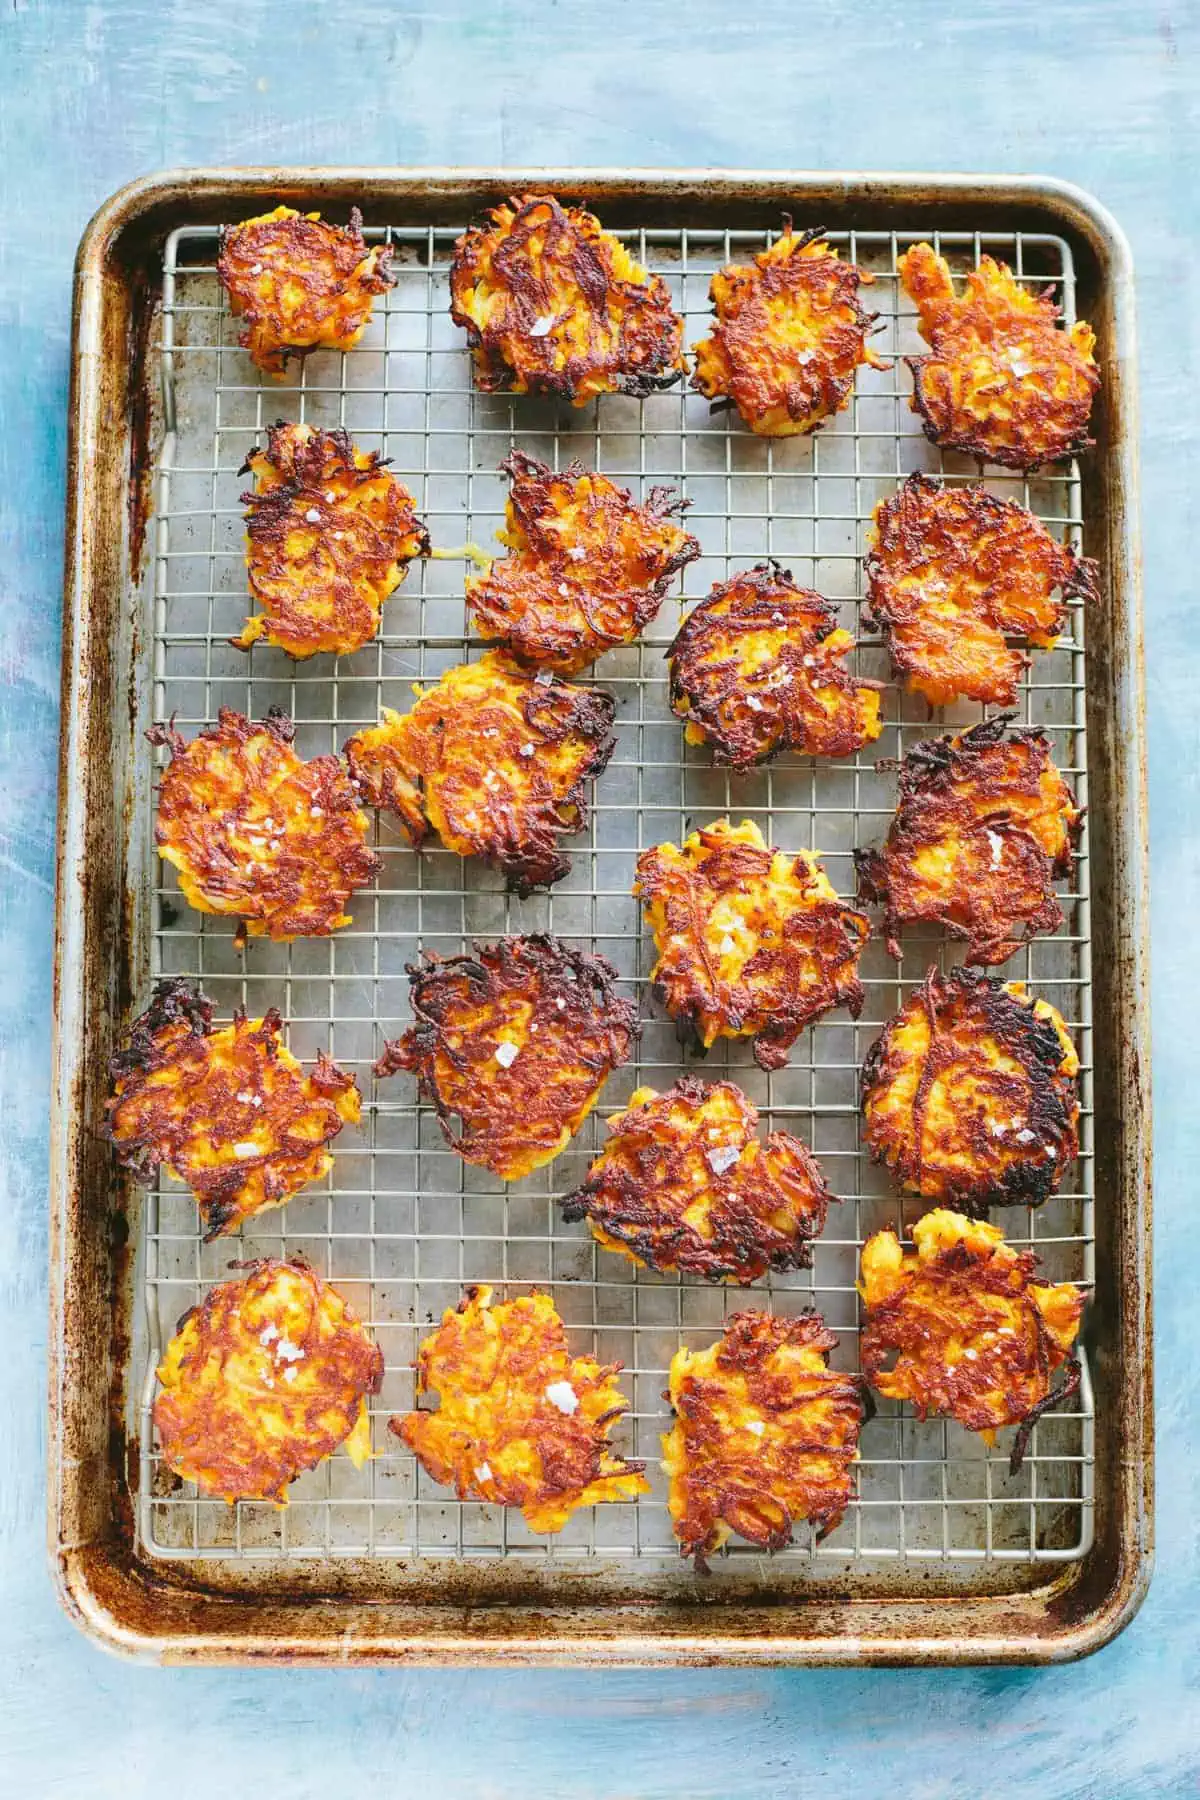 Butternut squash fritters draining on a metal rack over a baking sheet.